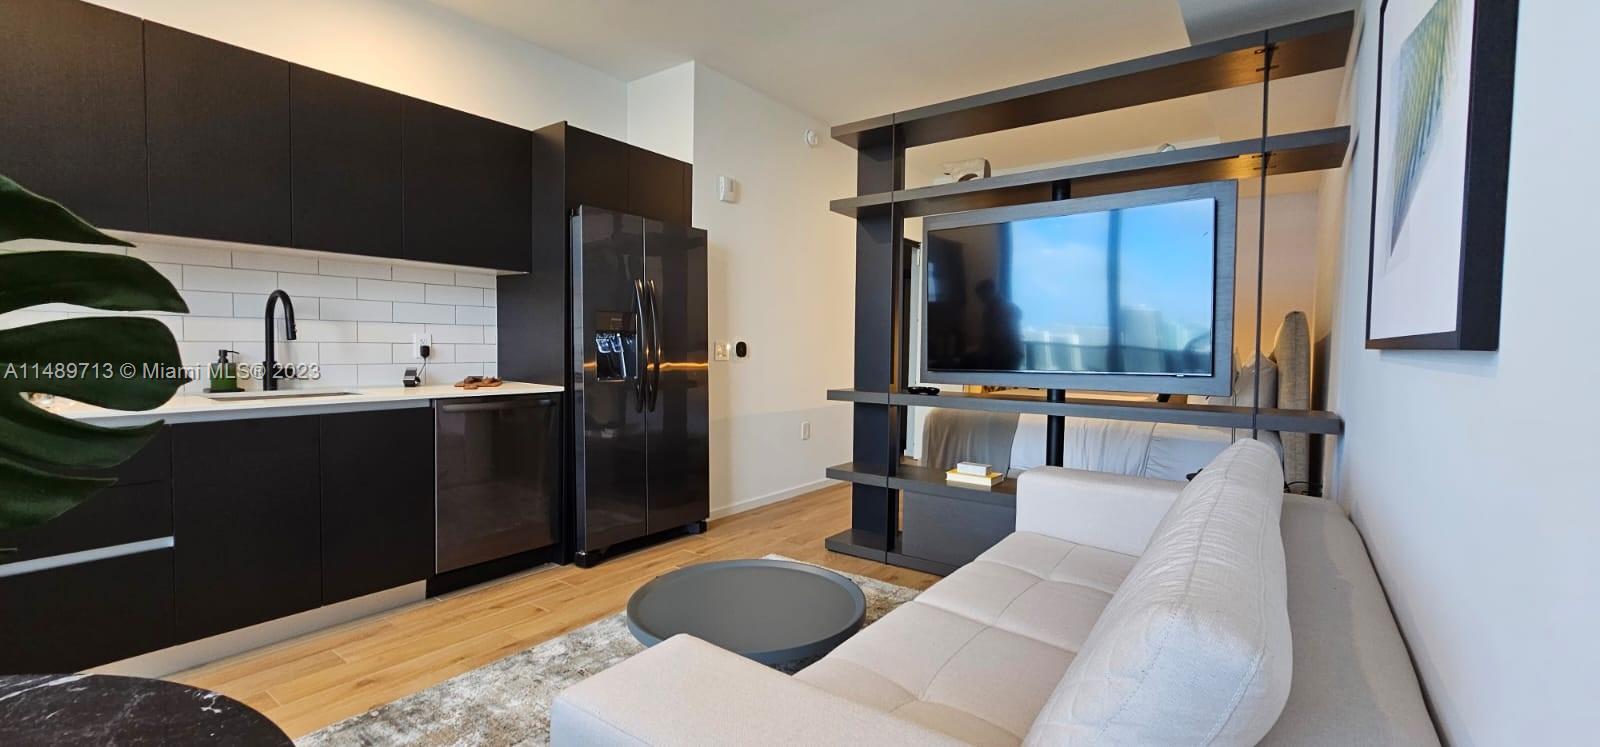 Discover modern luxury at The Elser Hotel & Residences in the heart of Miami. This fully furnished 26th-floor unit features 9-foot ceilings, floor-to-ceiling windows with panoramic views, a private balcony overlooking the Miami skyline and Biscayne Bay, porcelain tiles, in-unit washer/dryer, smart keyless entry, and a smart thermostat. Enjoy exclusive amenities like a 132-foot resort-style pool, private lounge areas with a poolside LED wall, a sky lounge, and a gym. Embrace a lifestyle with easy access to top-notch entertainment, arts, and dining. The epitome of Miami living awaits you.